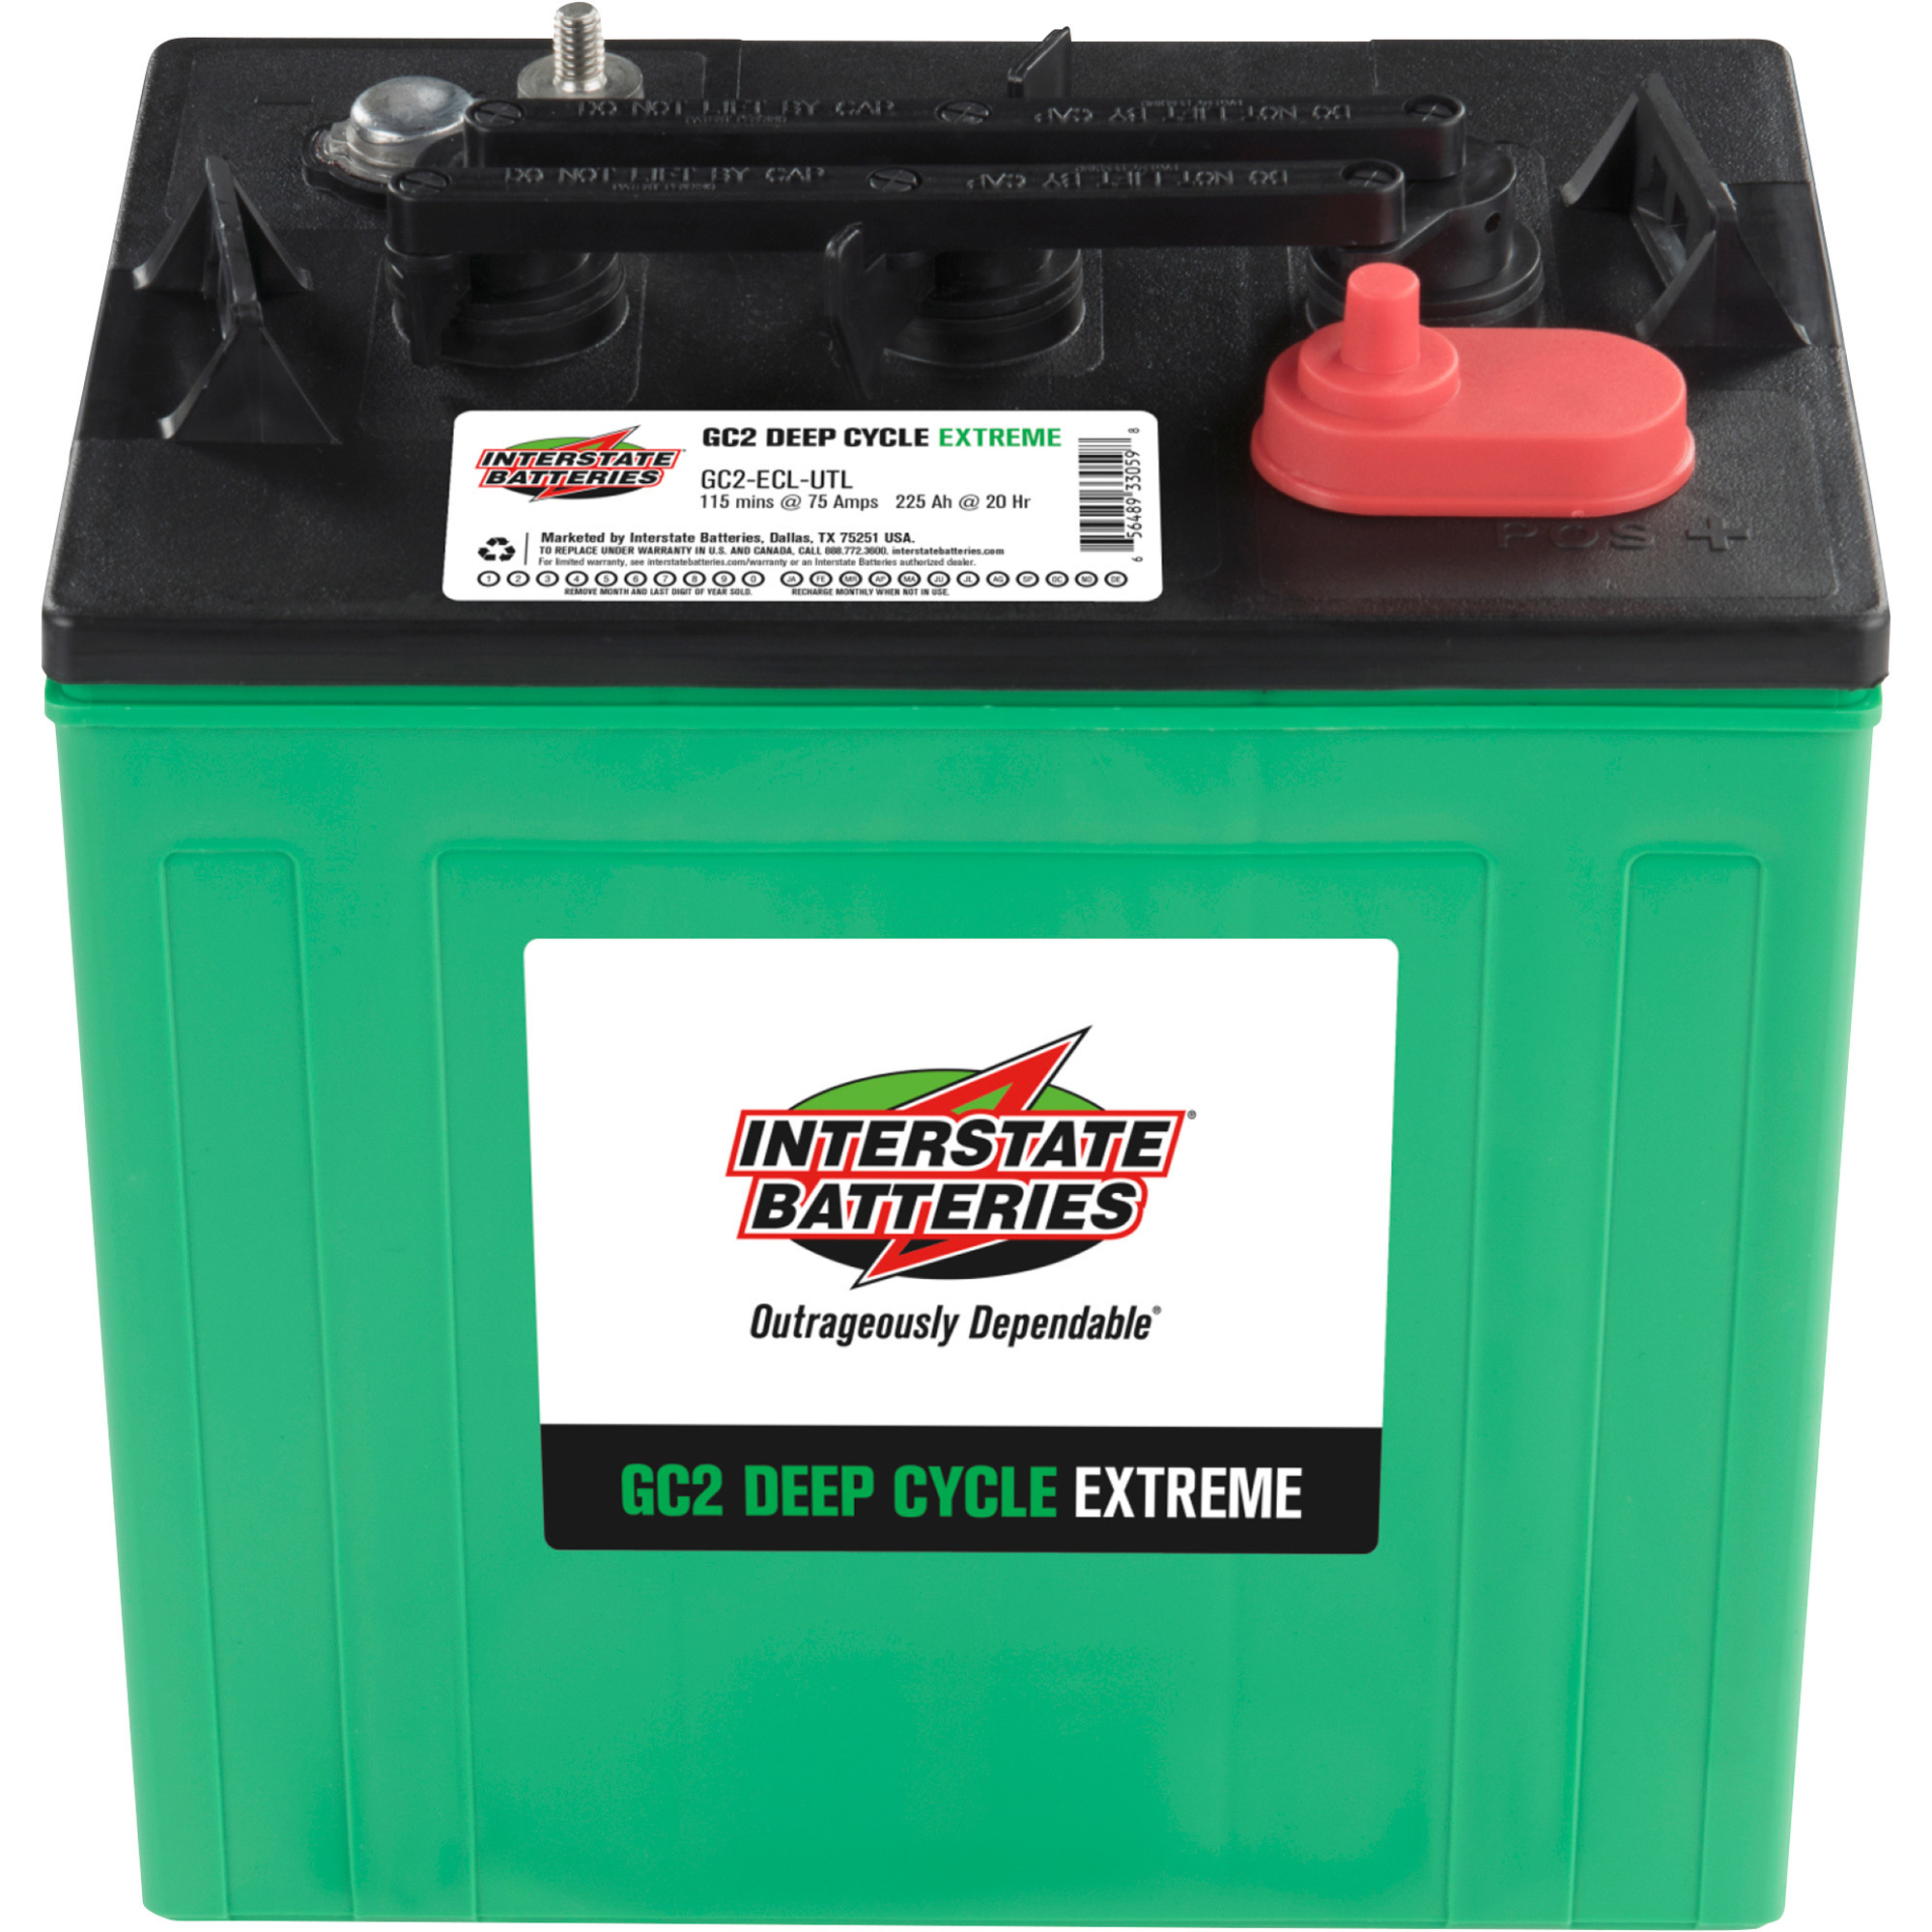 Interstate GC2 Deep Cycle Extreme Golf Cart Battery â 6V, 225Ah, Model GC2-ECL-UTL